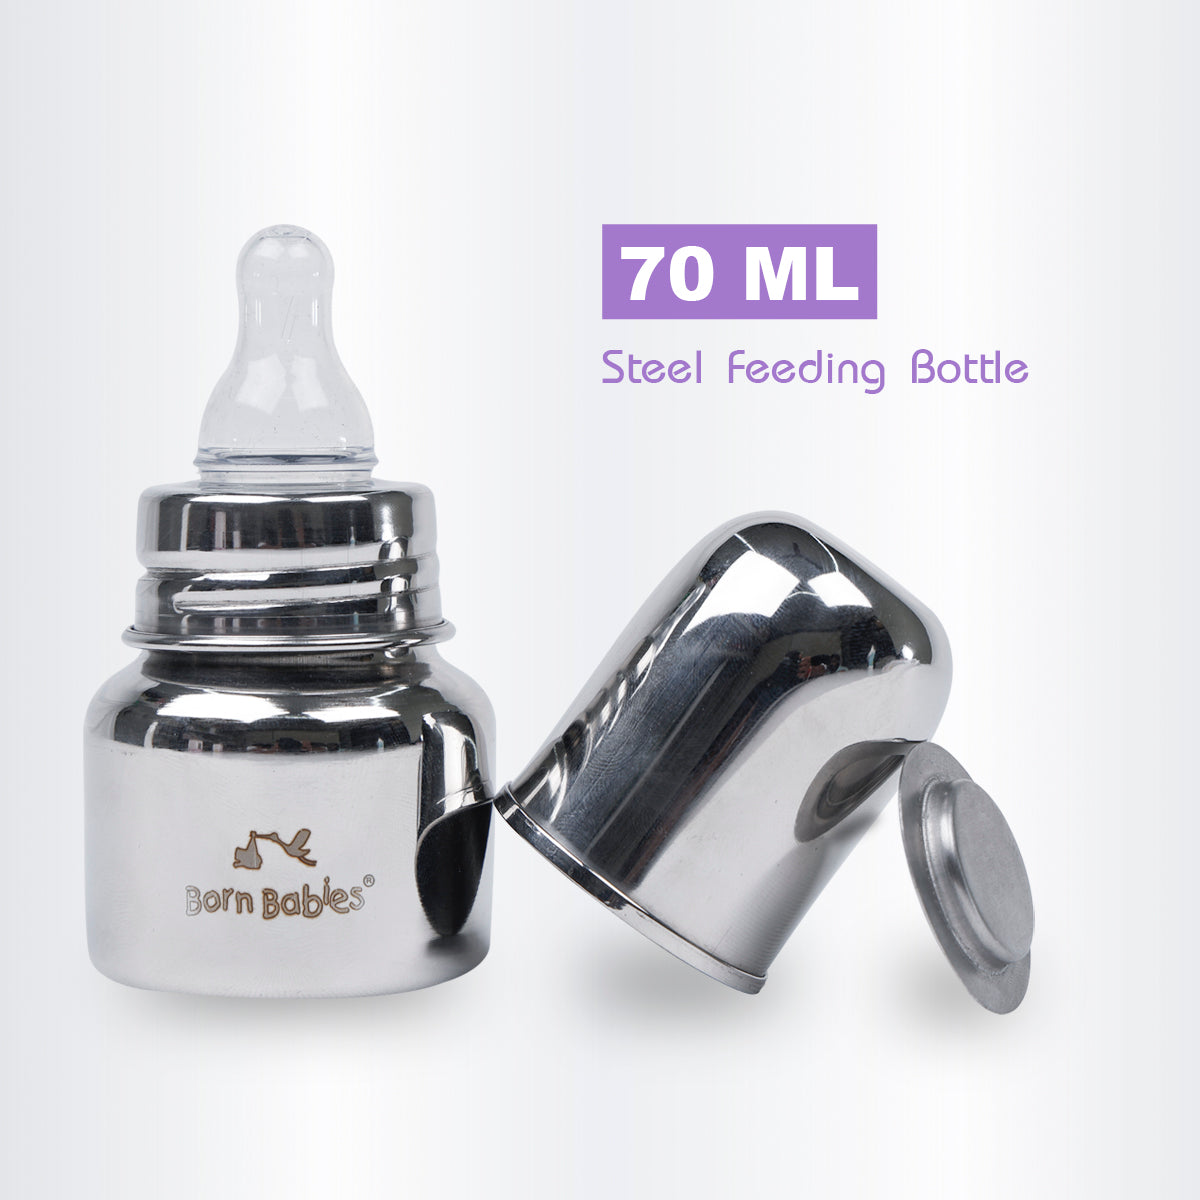 70 ml Born Babies Stainless Steel Feeding Bottle With Anti-Colic Silicone Nipple & Travel Cap